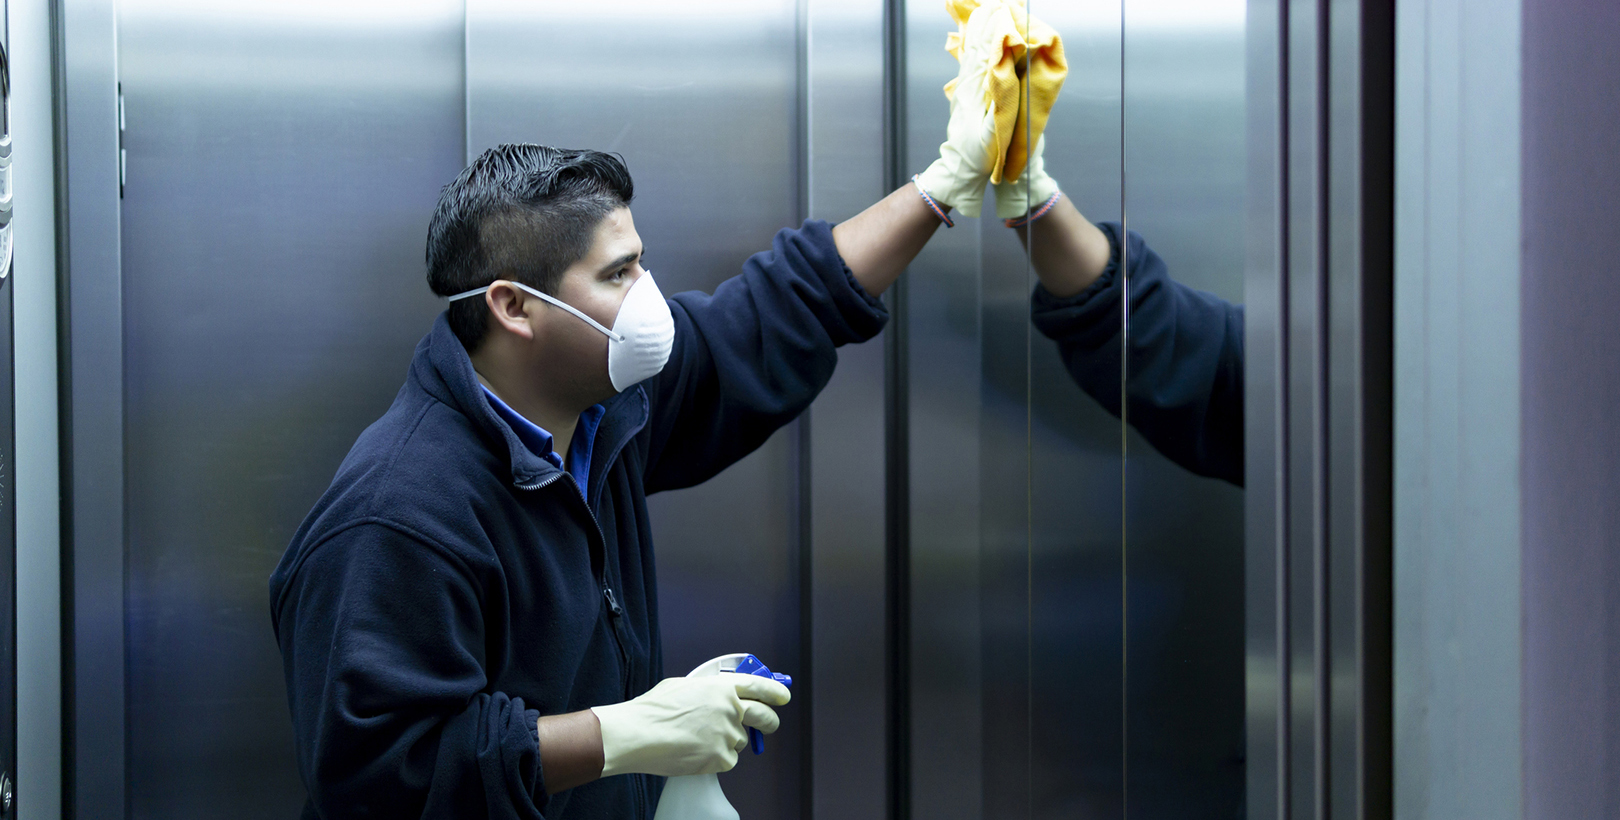 Janitor: A janitor cleaning a mirror in an elevator